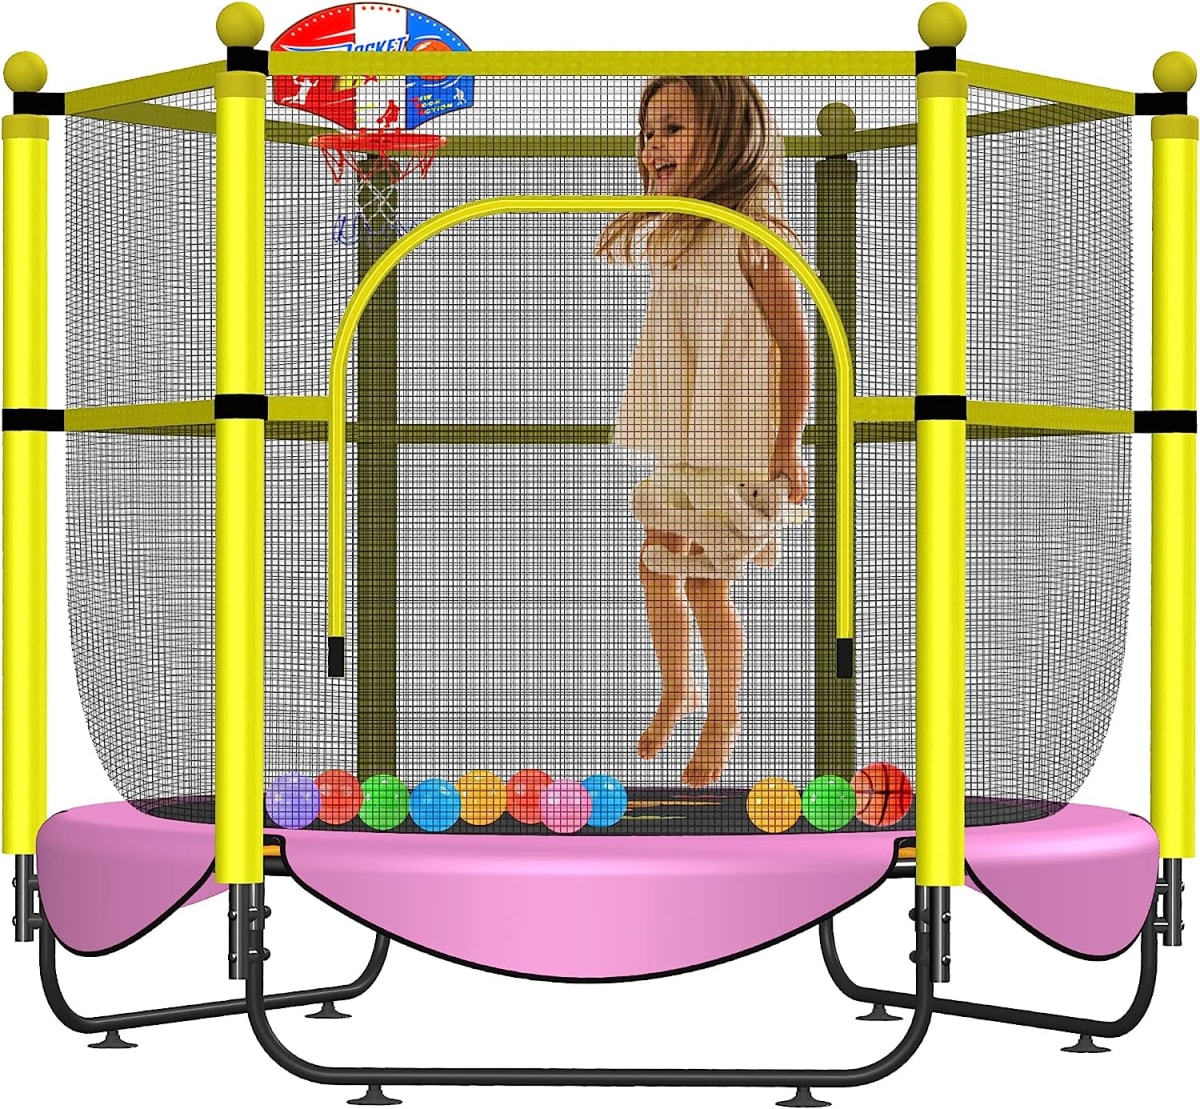 60" Trampoline for Kids with Net